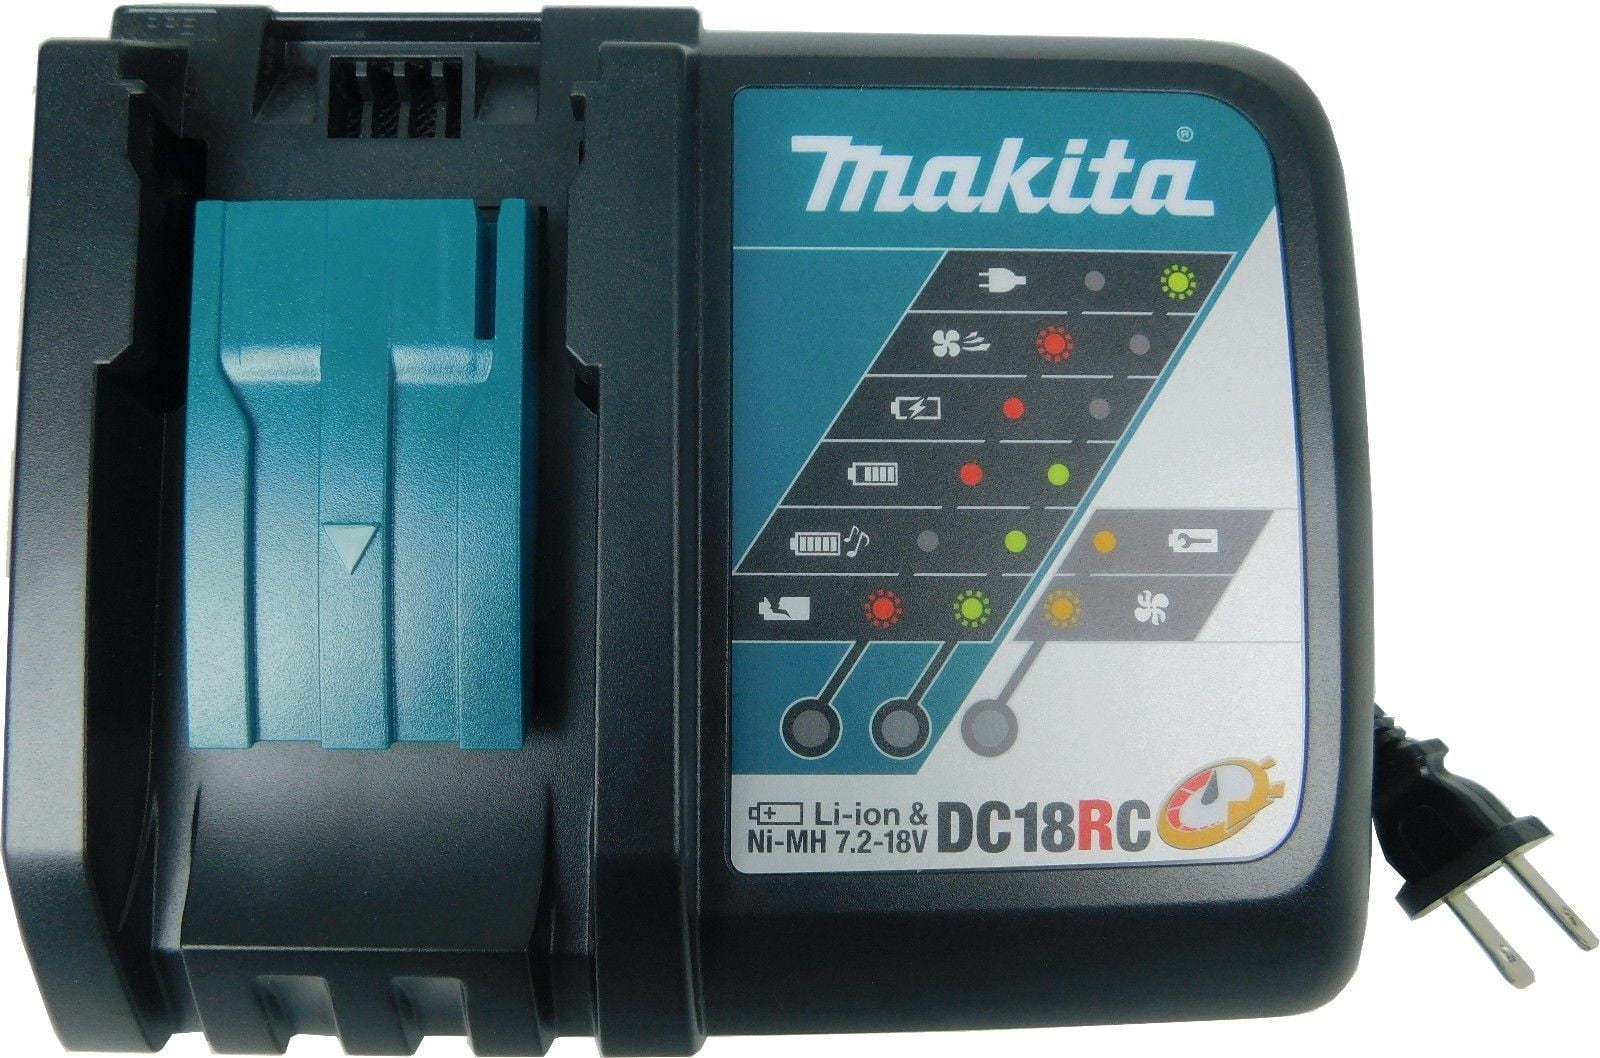 Makita DC18RC 18V LXT Lithium-Ion Rapid Tool Battery Charger 